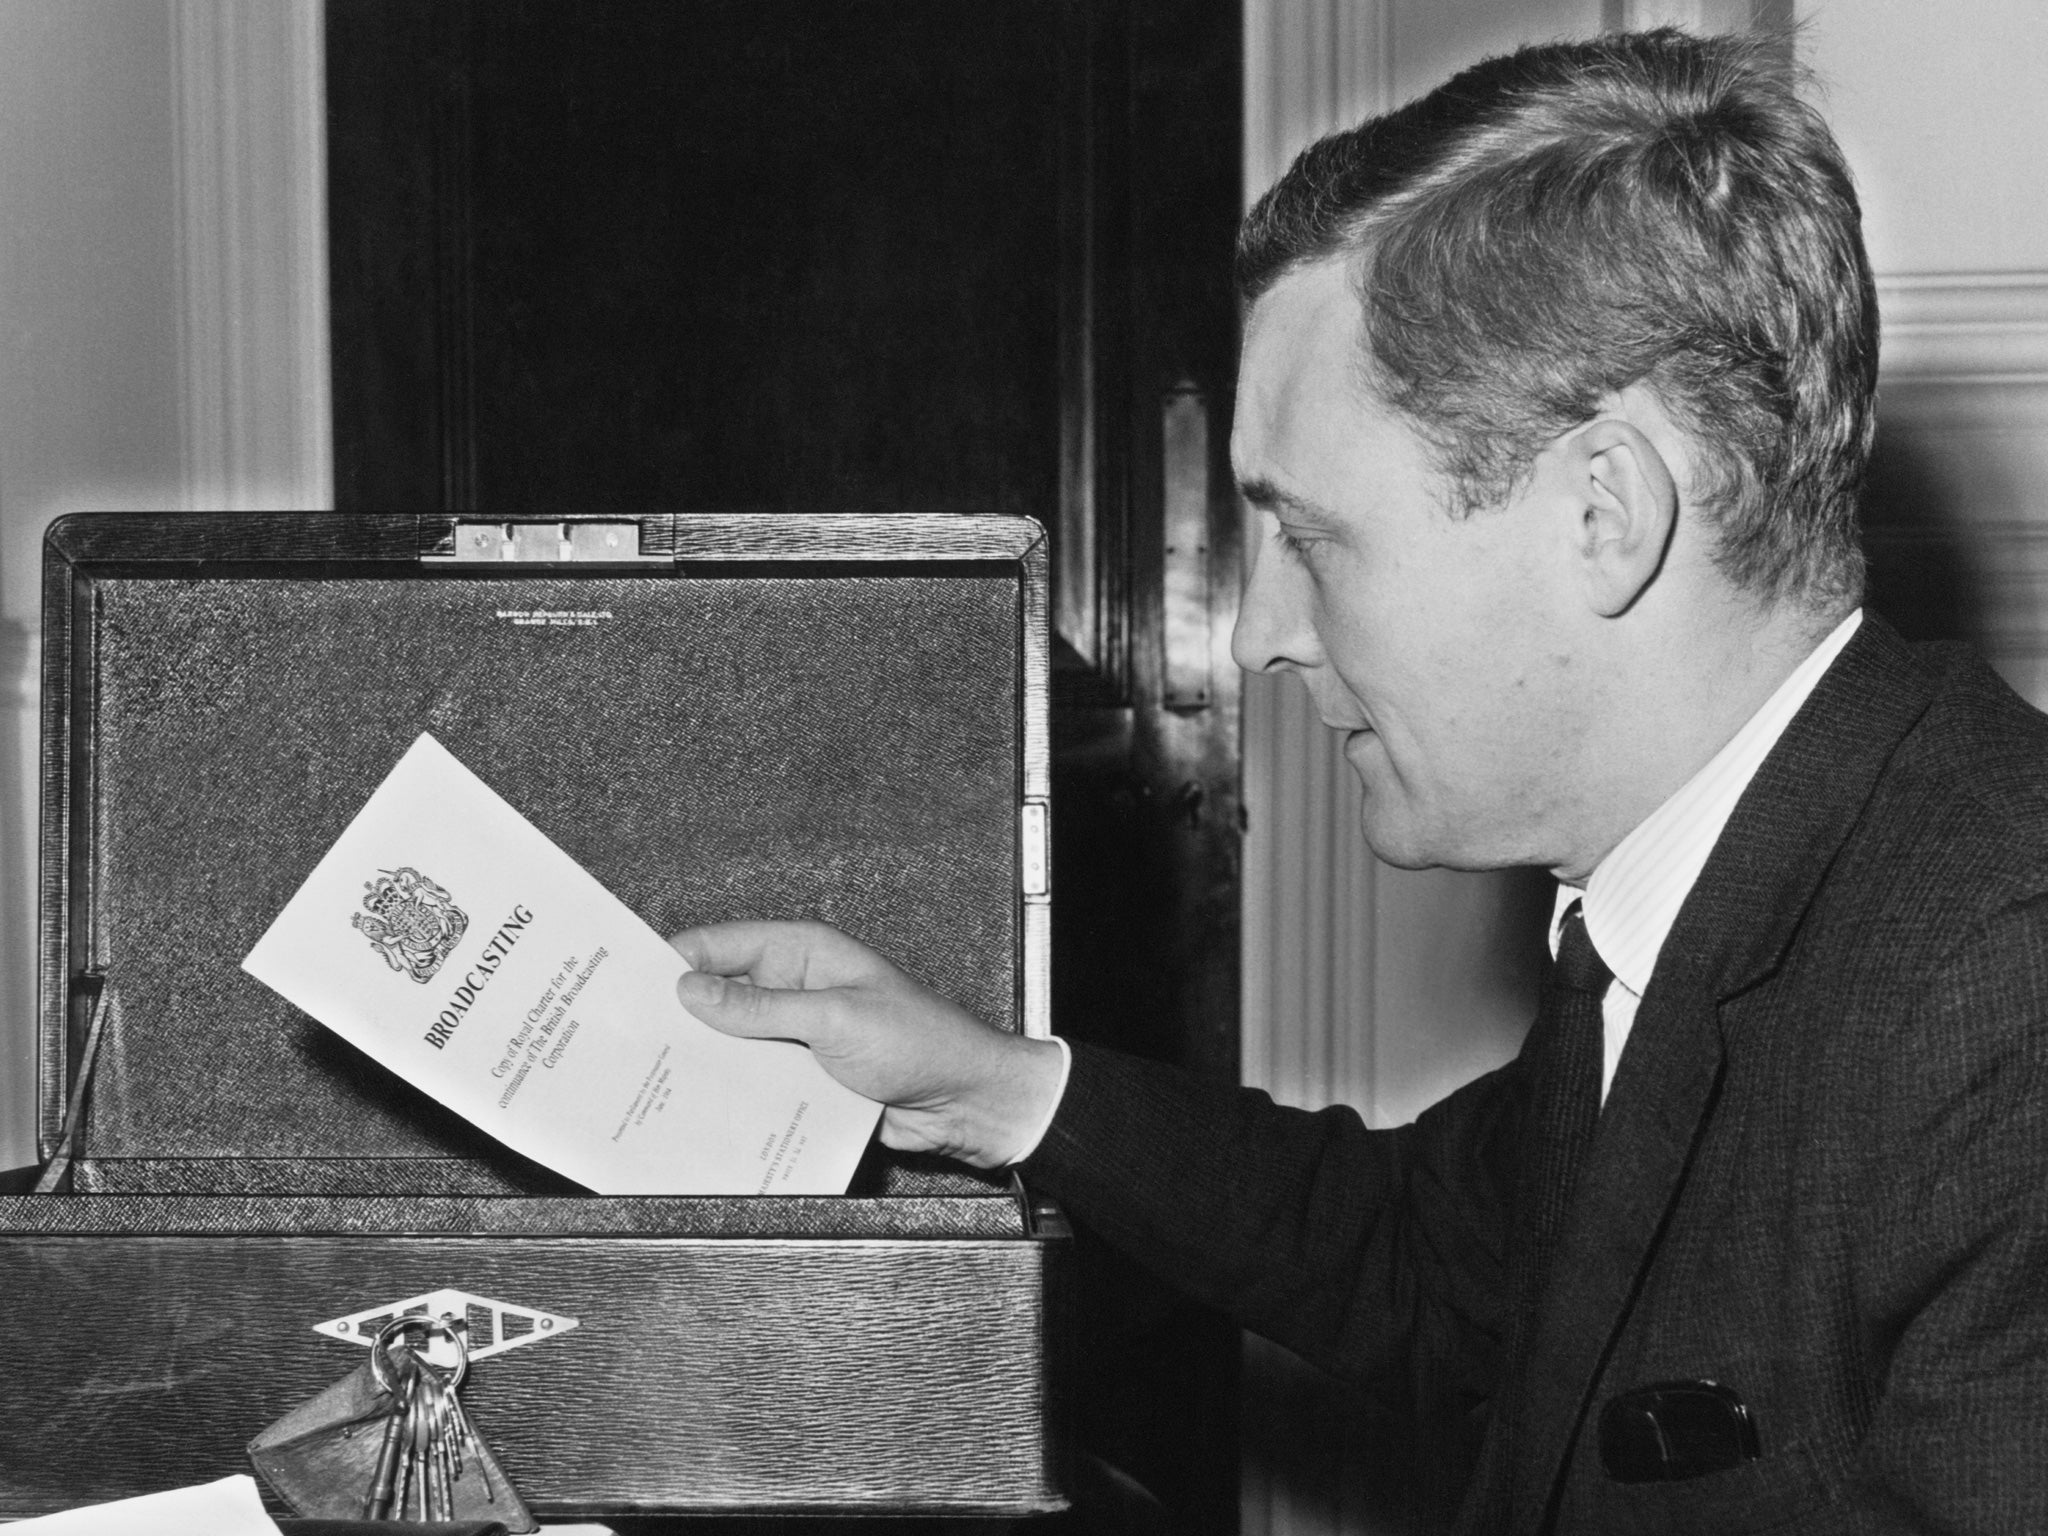 Tony Benn places an official report on broadcasting into his dispatch box on his first day in his new Cabinet role of Postmaster General in 1964